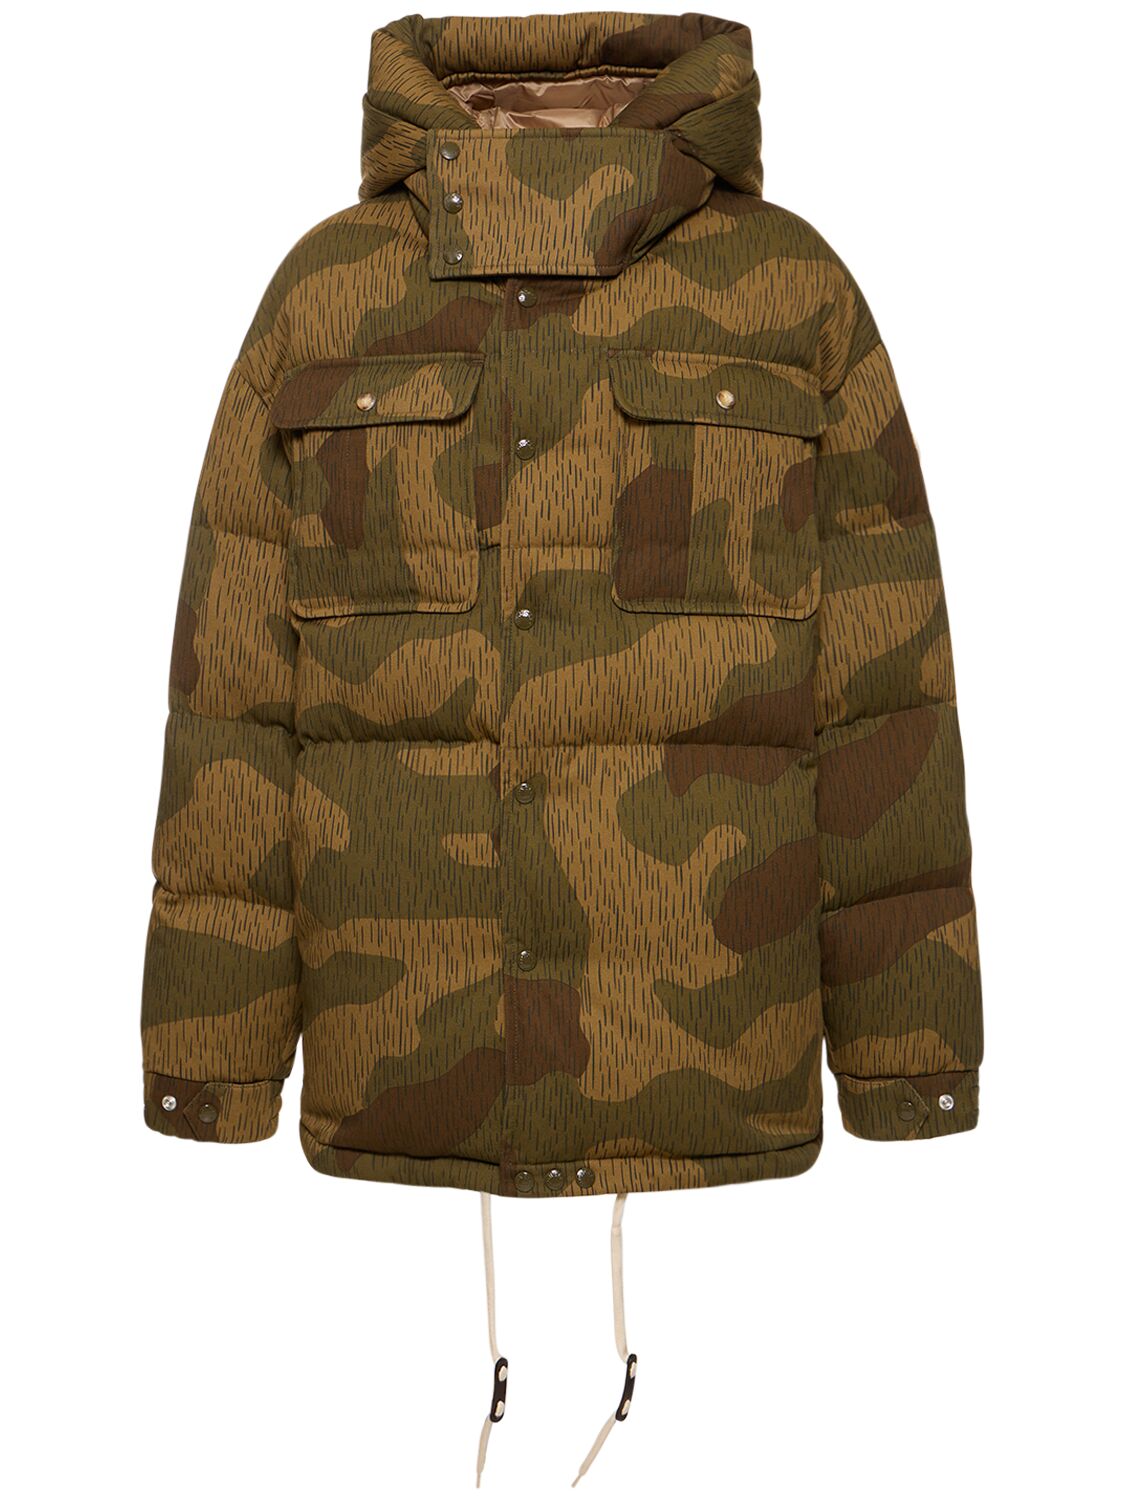 Moncler Genius Moncler X Palm Angels Down Jacket In Brown